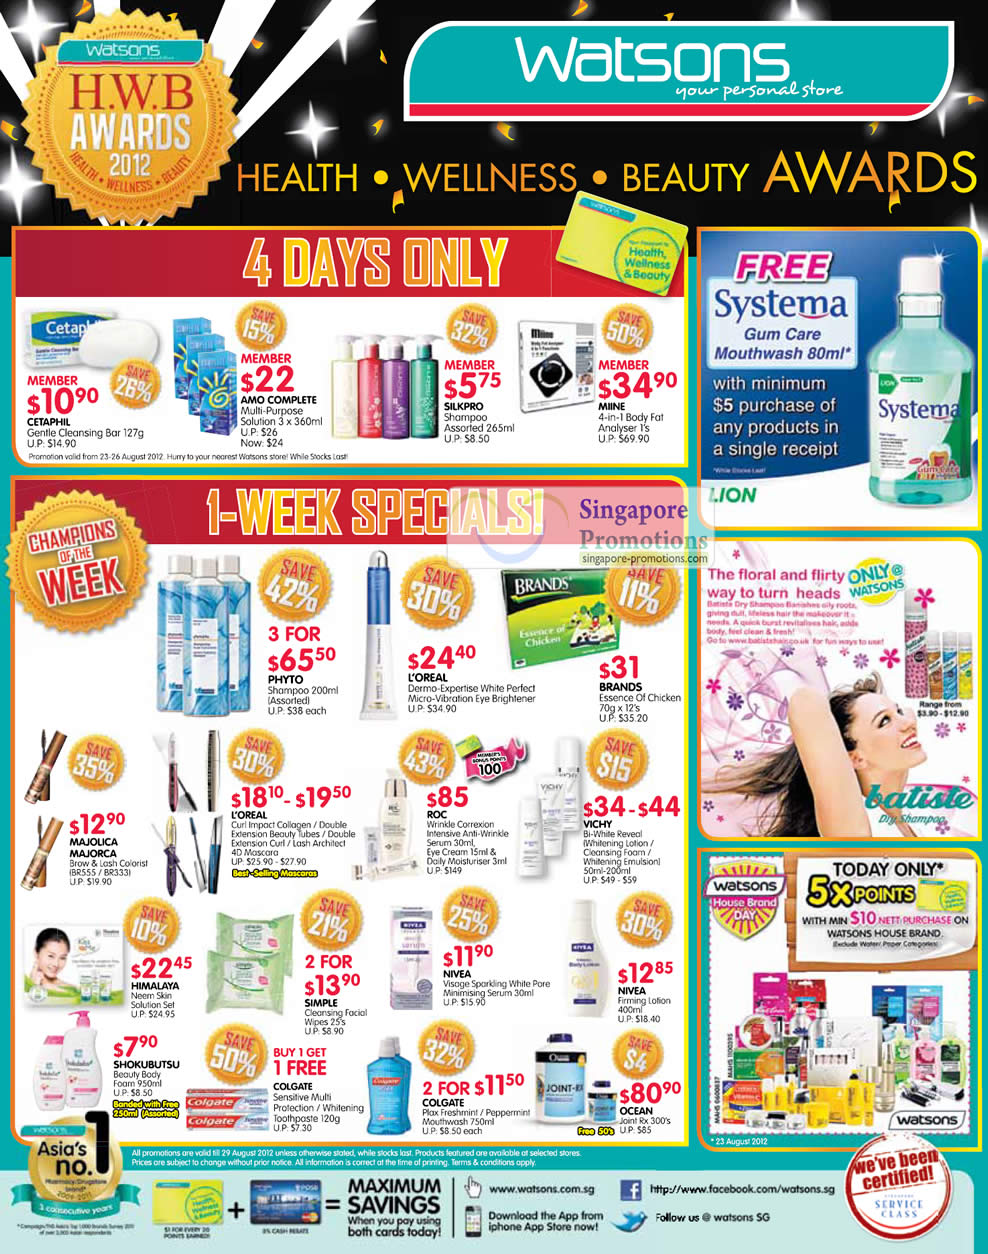 Featured image for Watsons Personal Care, Health, Cosmetics & Beauty Offers 23 - 29 Aug 2012